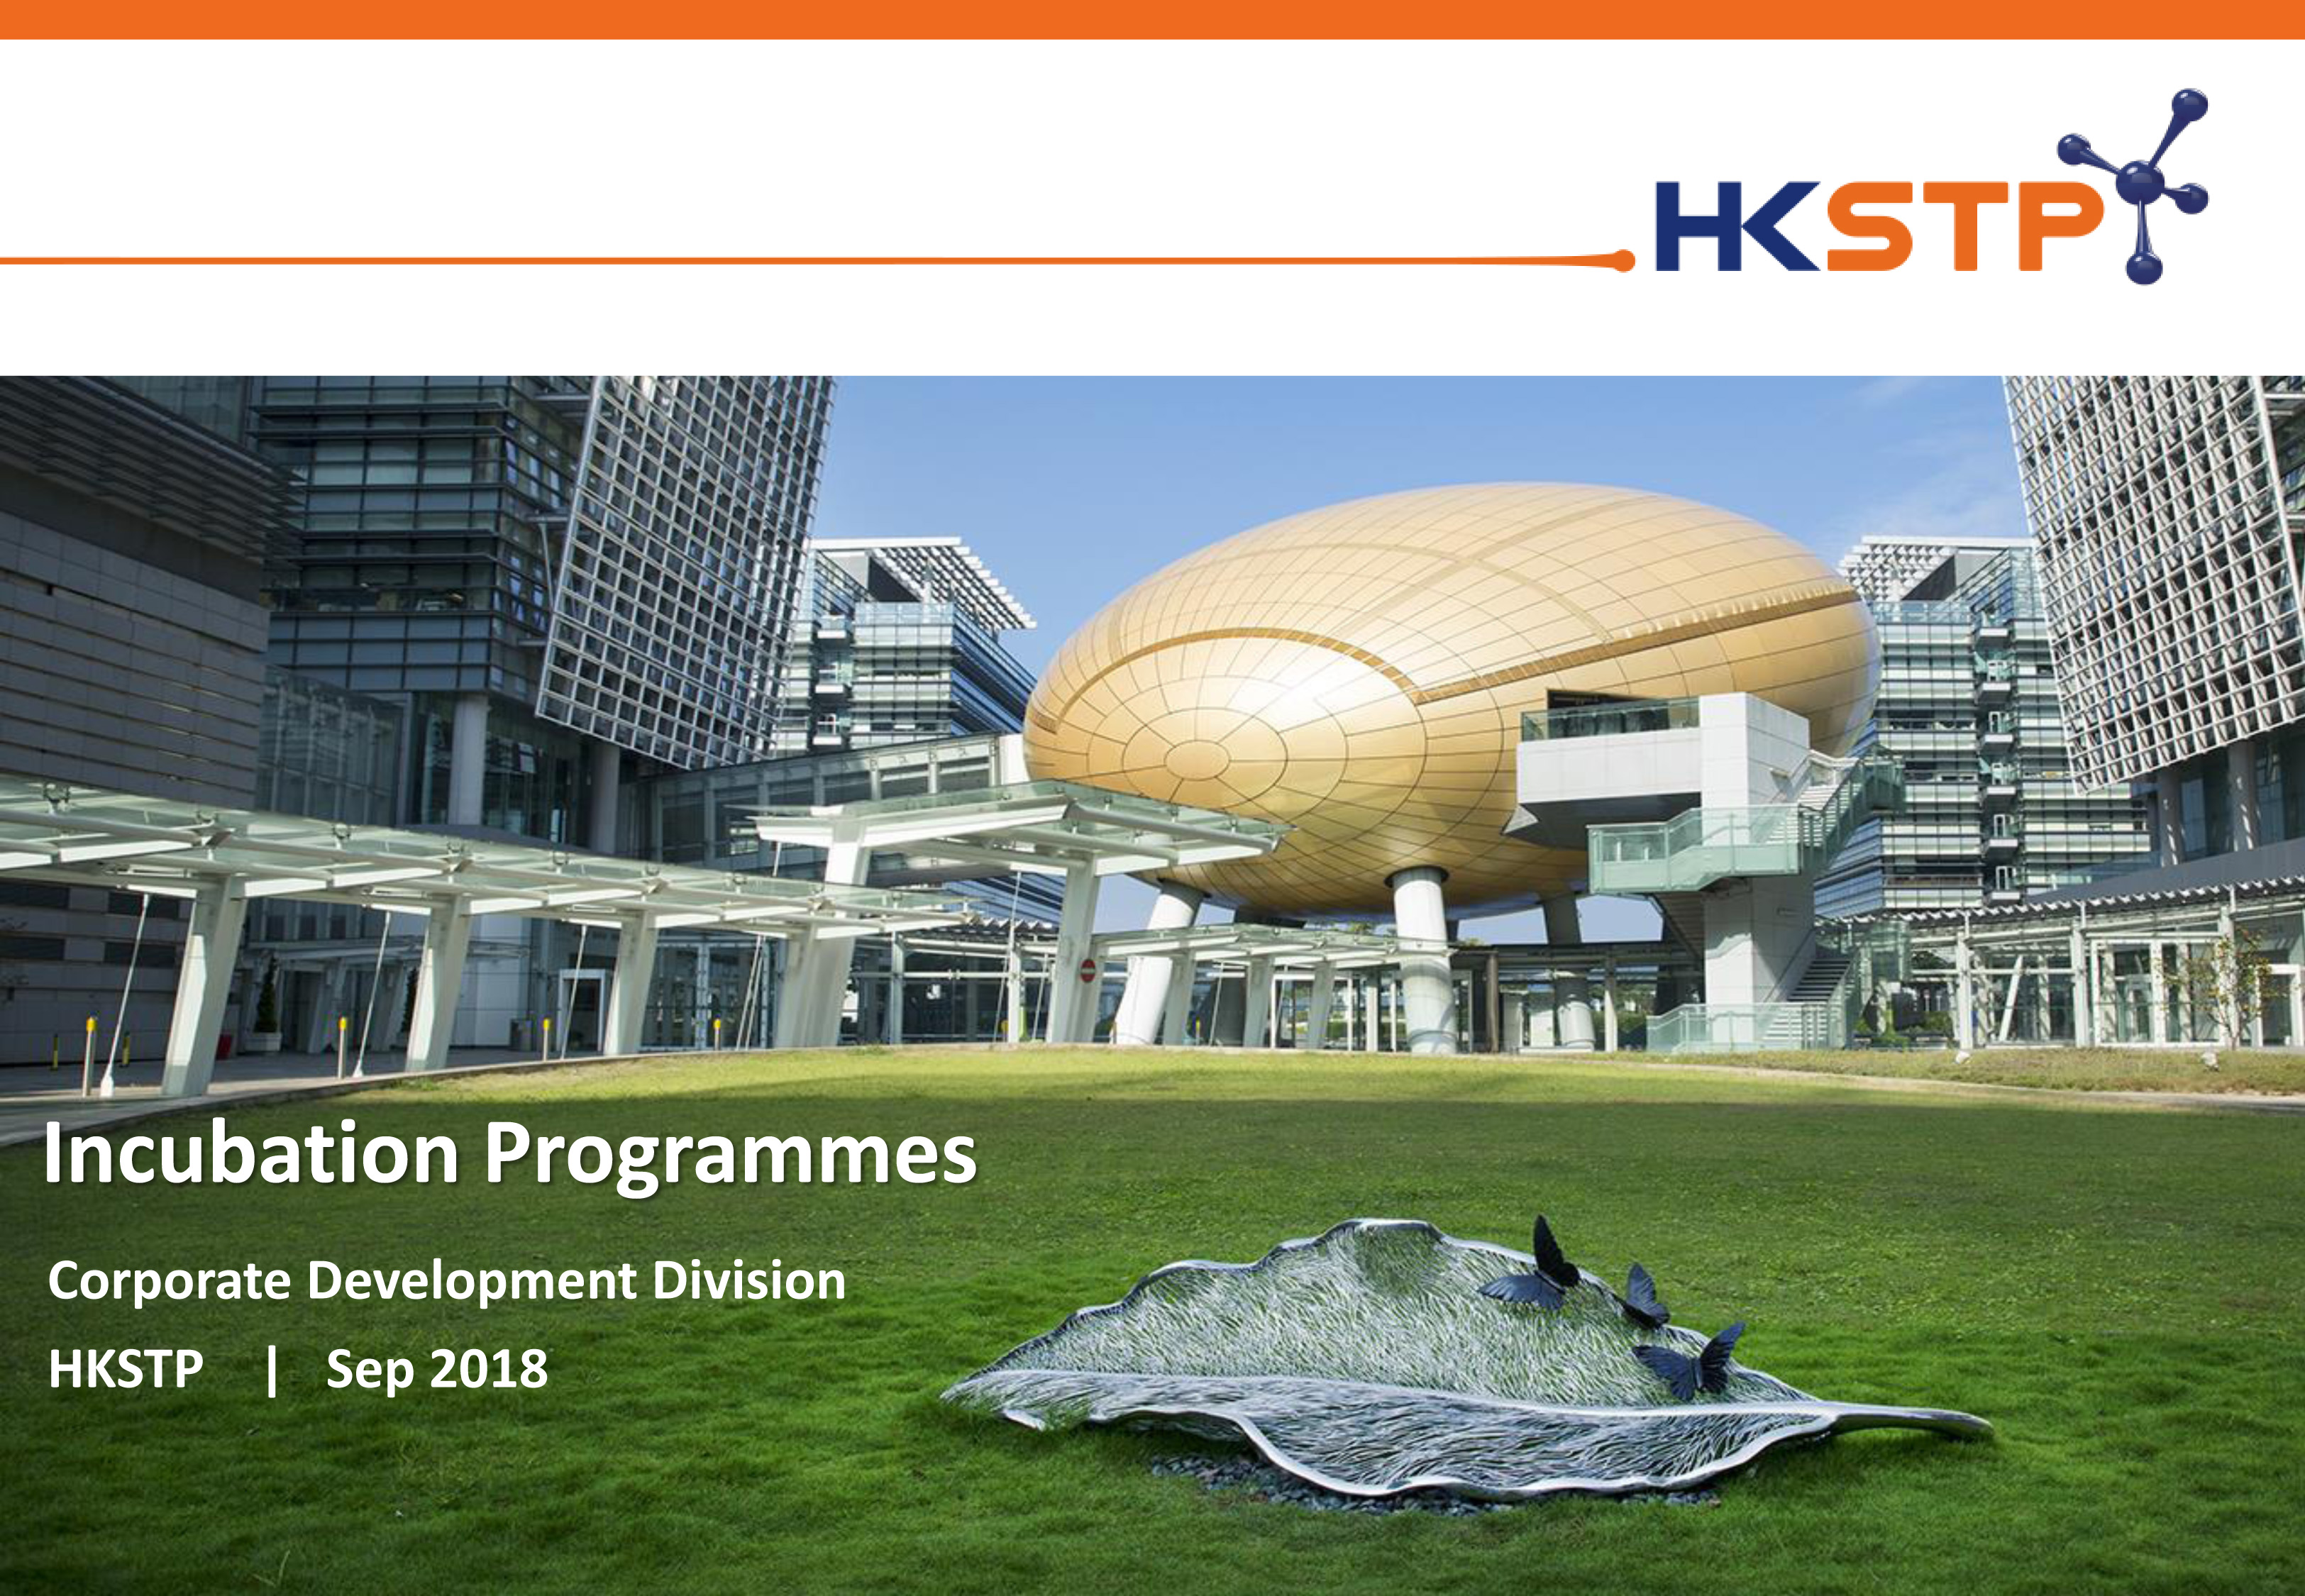 Briefing Session of HKSTP Incubation Programme for TSSSU@HKU and iDendron on Sept 6, 2018